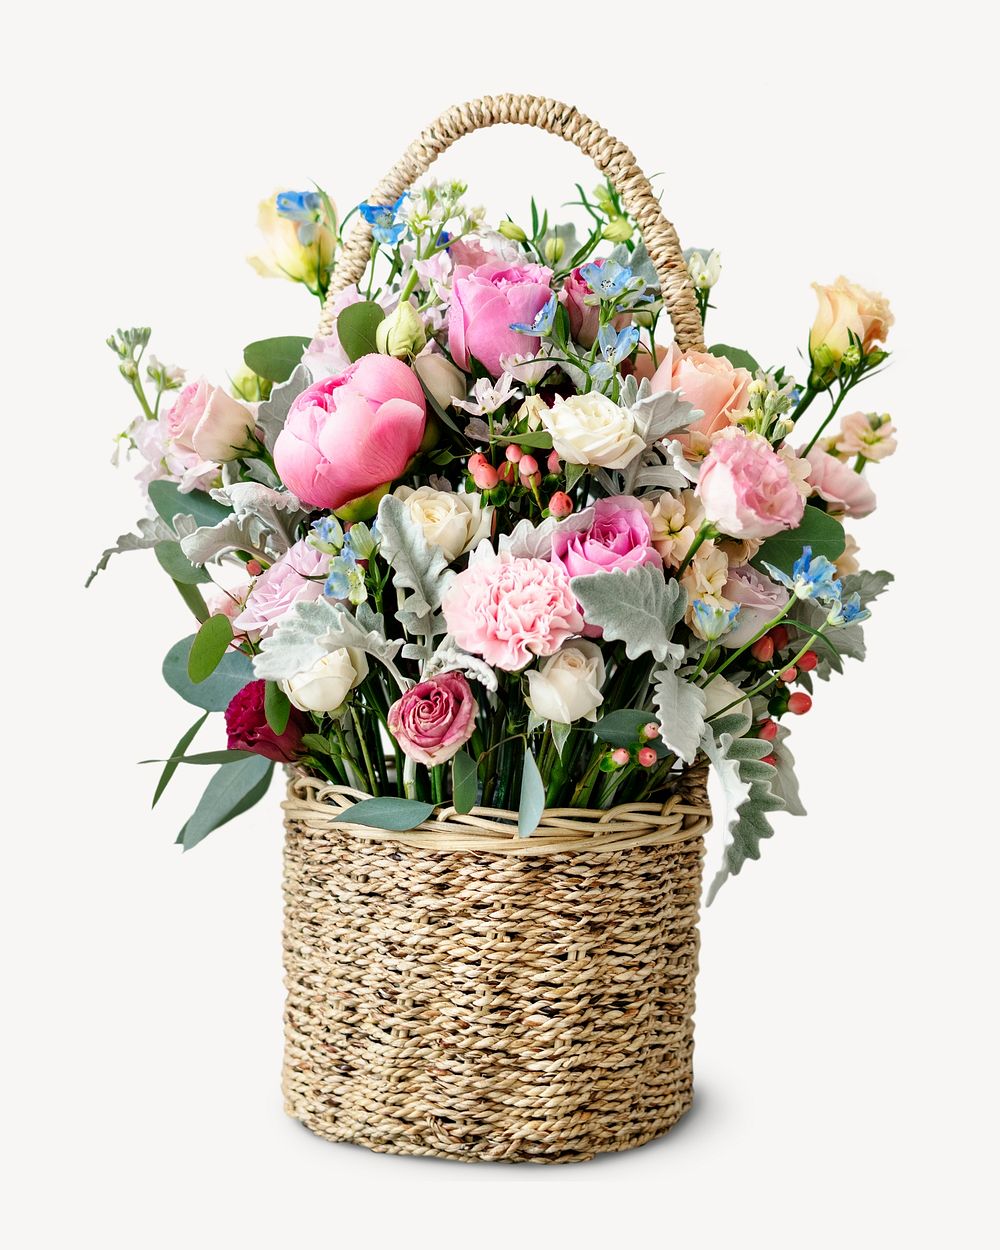 Spring flower basket isolated image psd